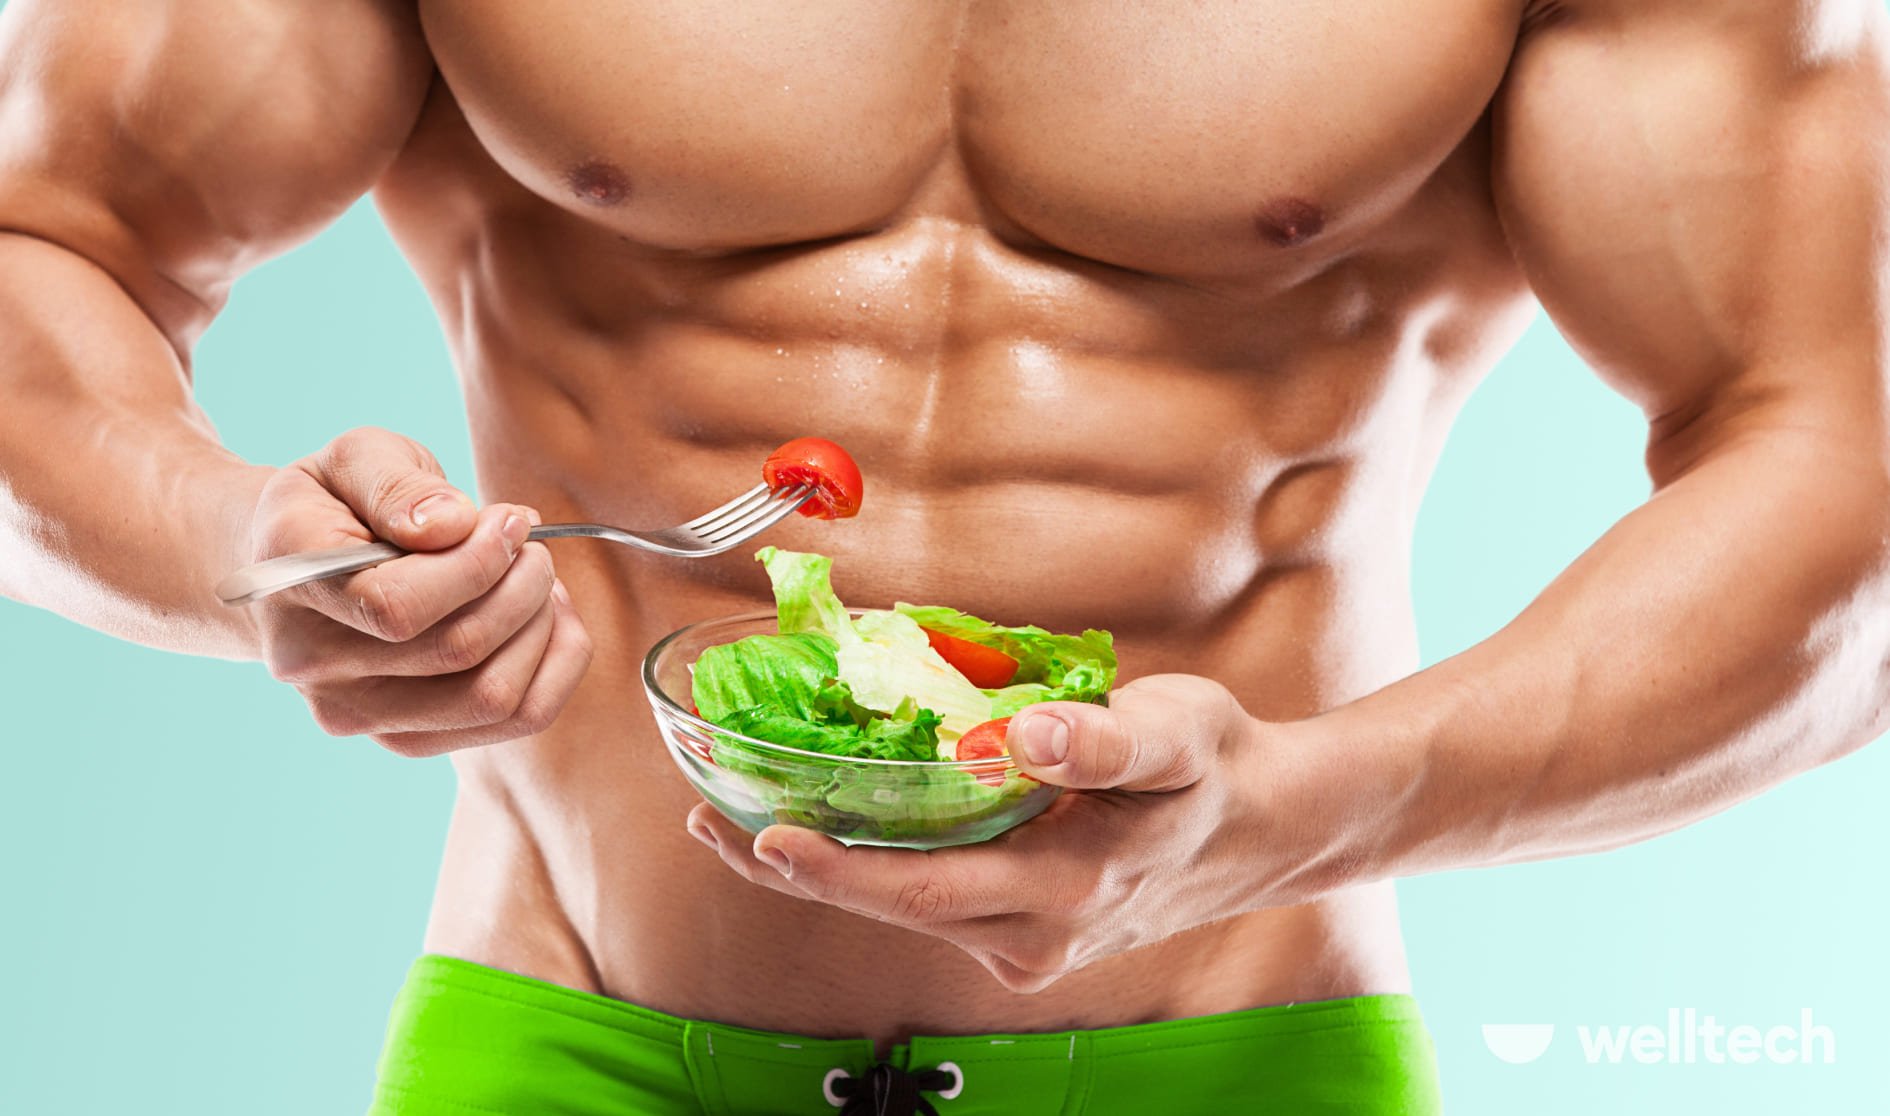 a male body with muscle gains, a man is holding a bowl of salad, vegetarian diet to build muscle